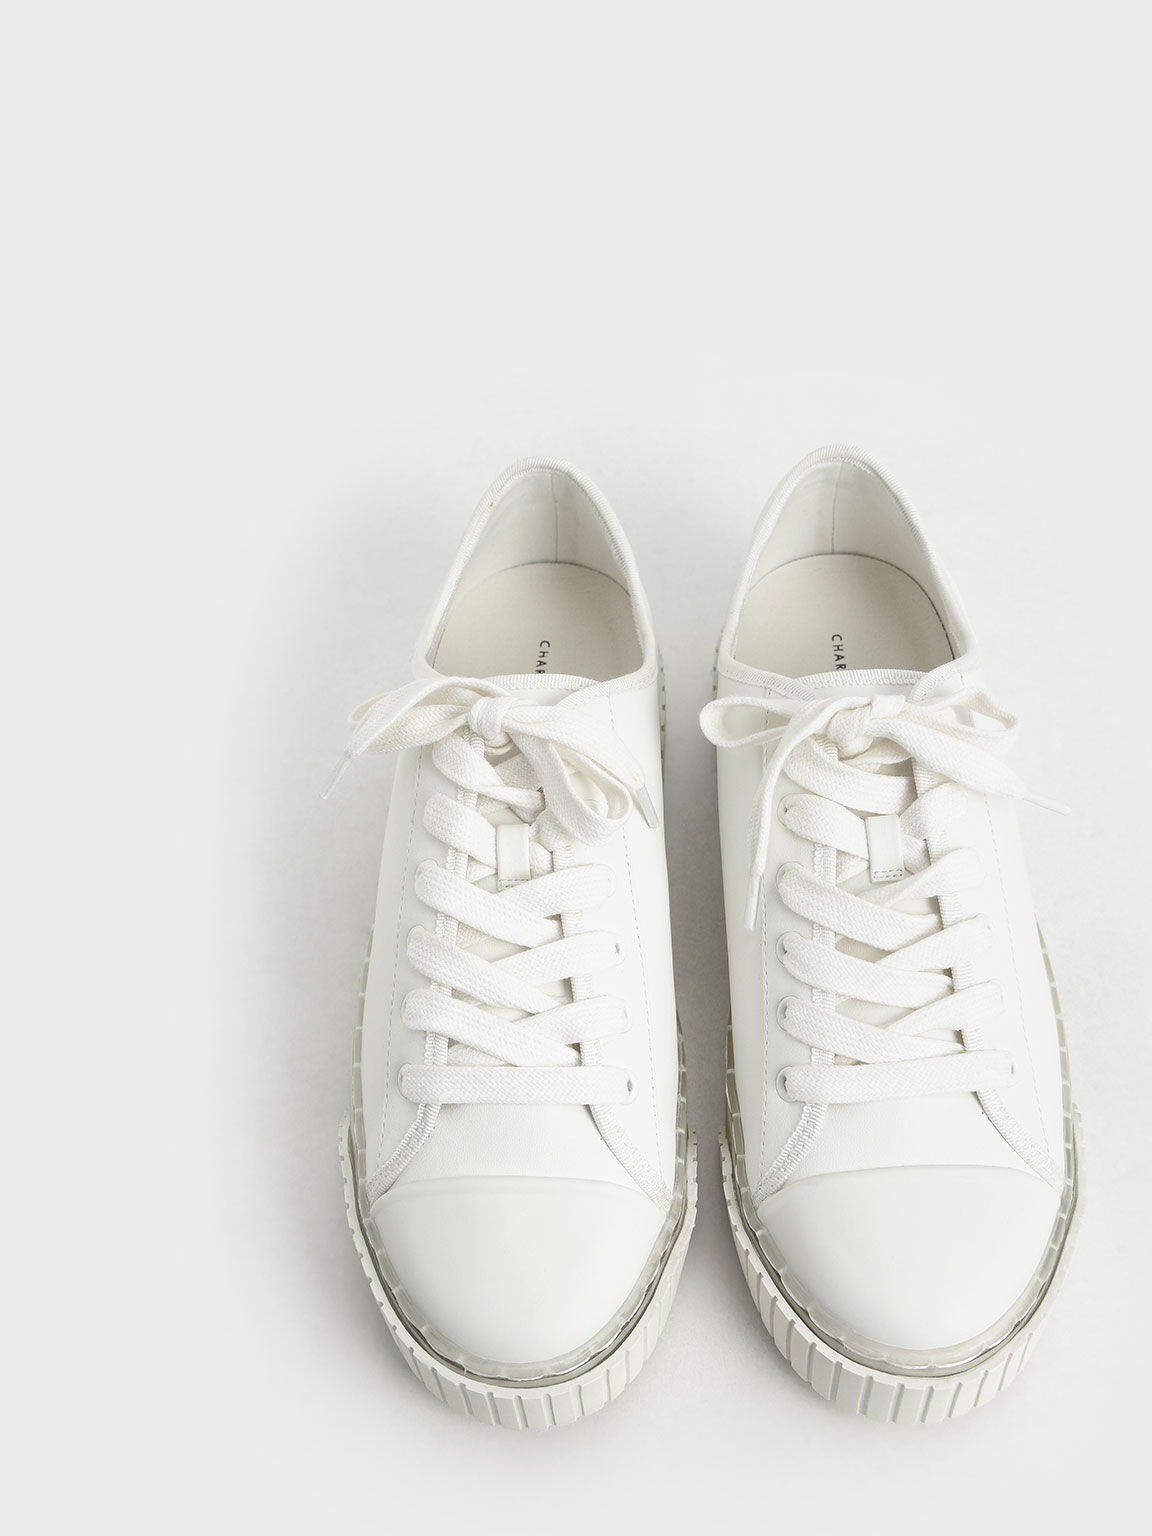 Purpose Collection 2021: Platform Sneakers, White, hi-res